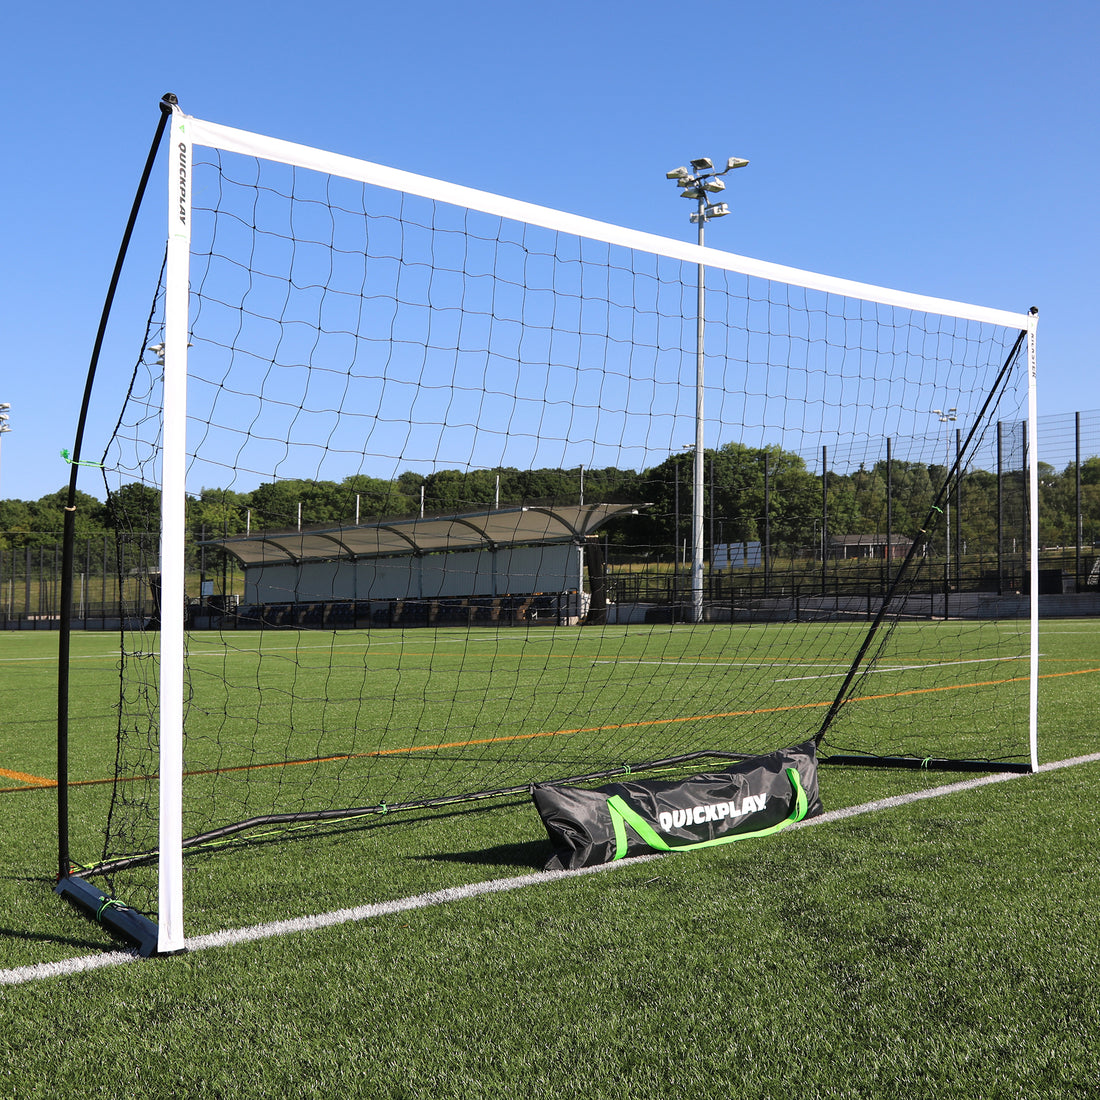 KICKSTER Base Weight (Set of 2) Large Goals Sizes: 3x2M >  18.5 x 6.5'  - For NEW KICKSTERS only